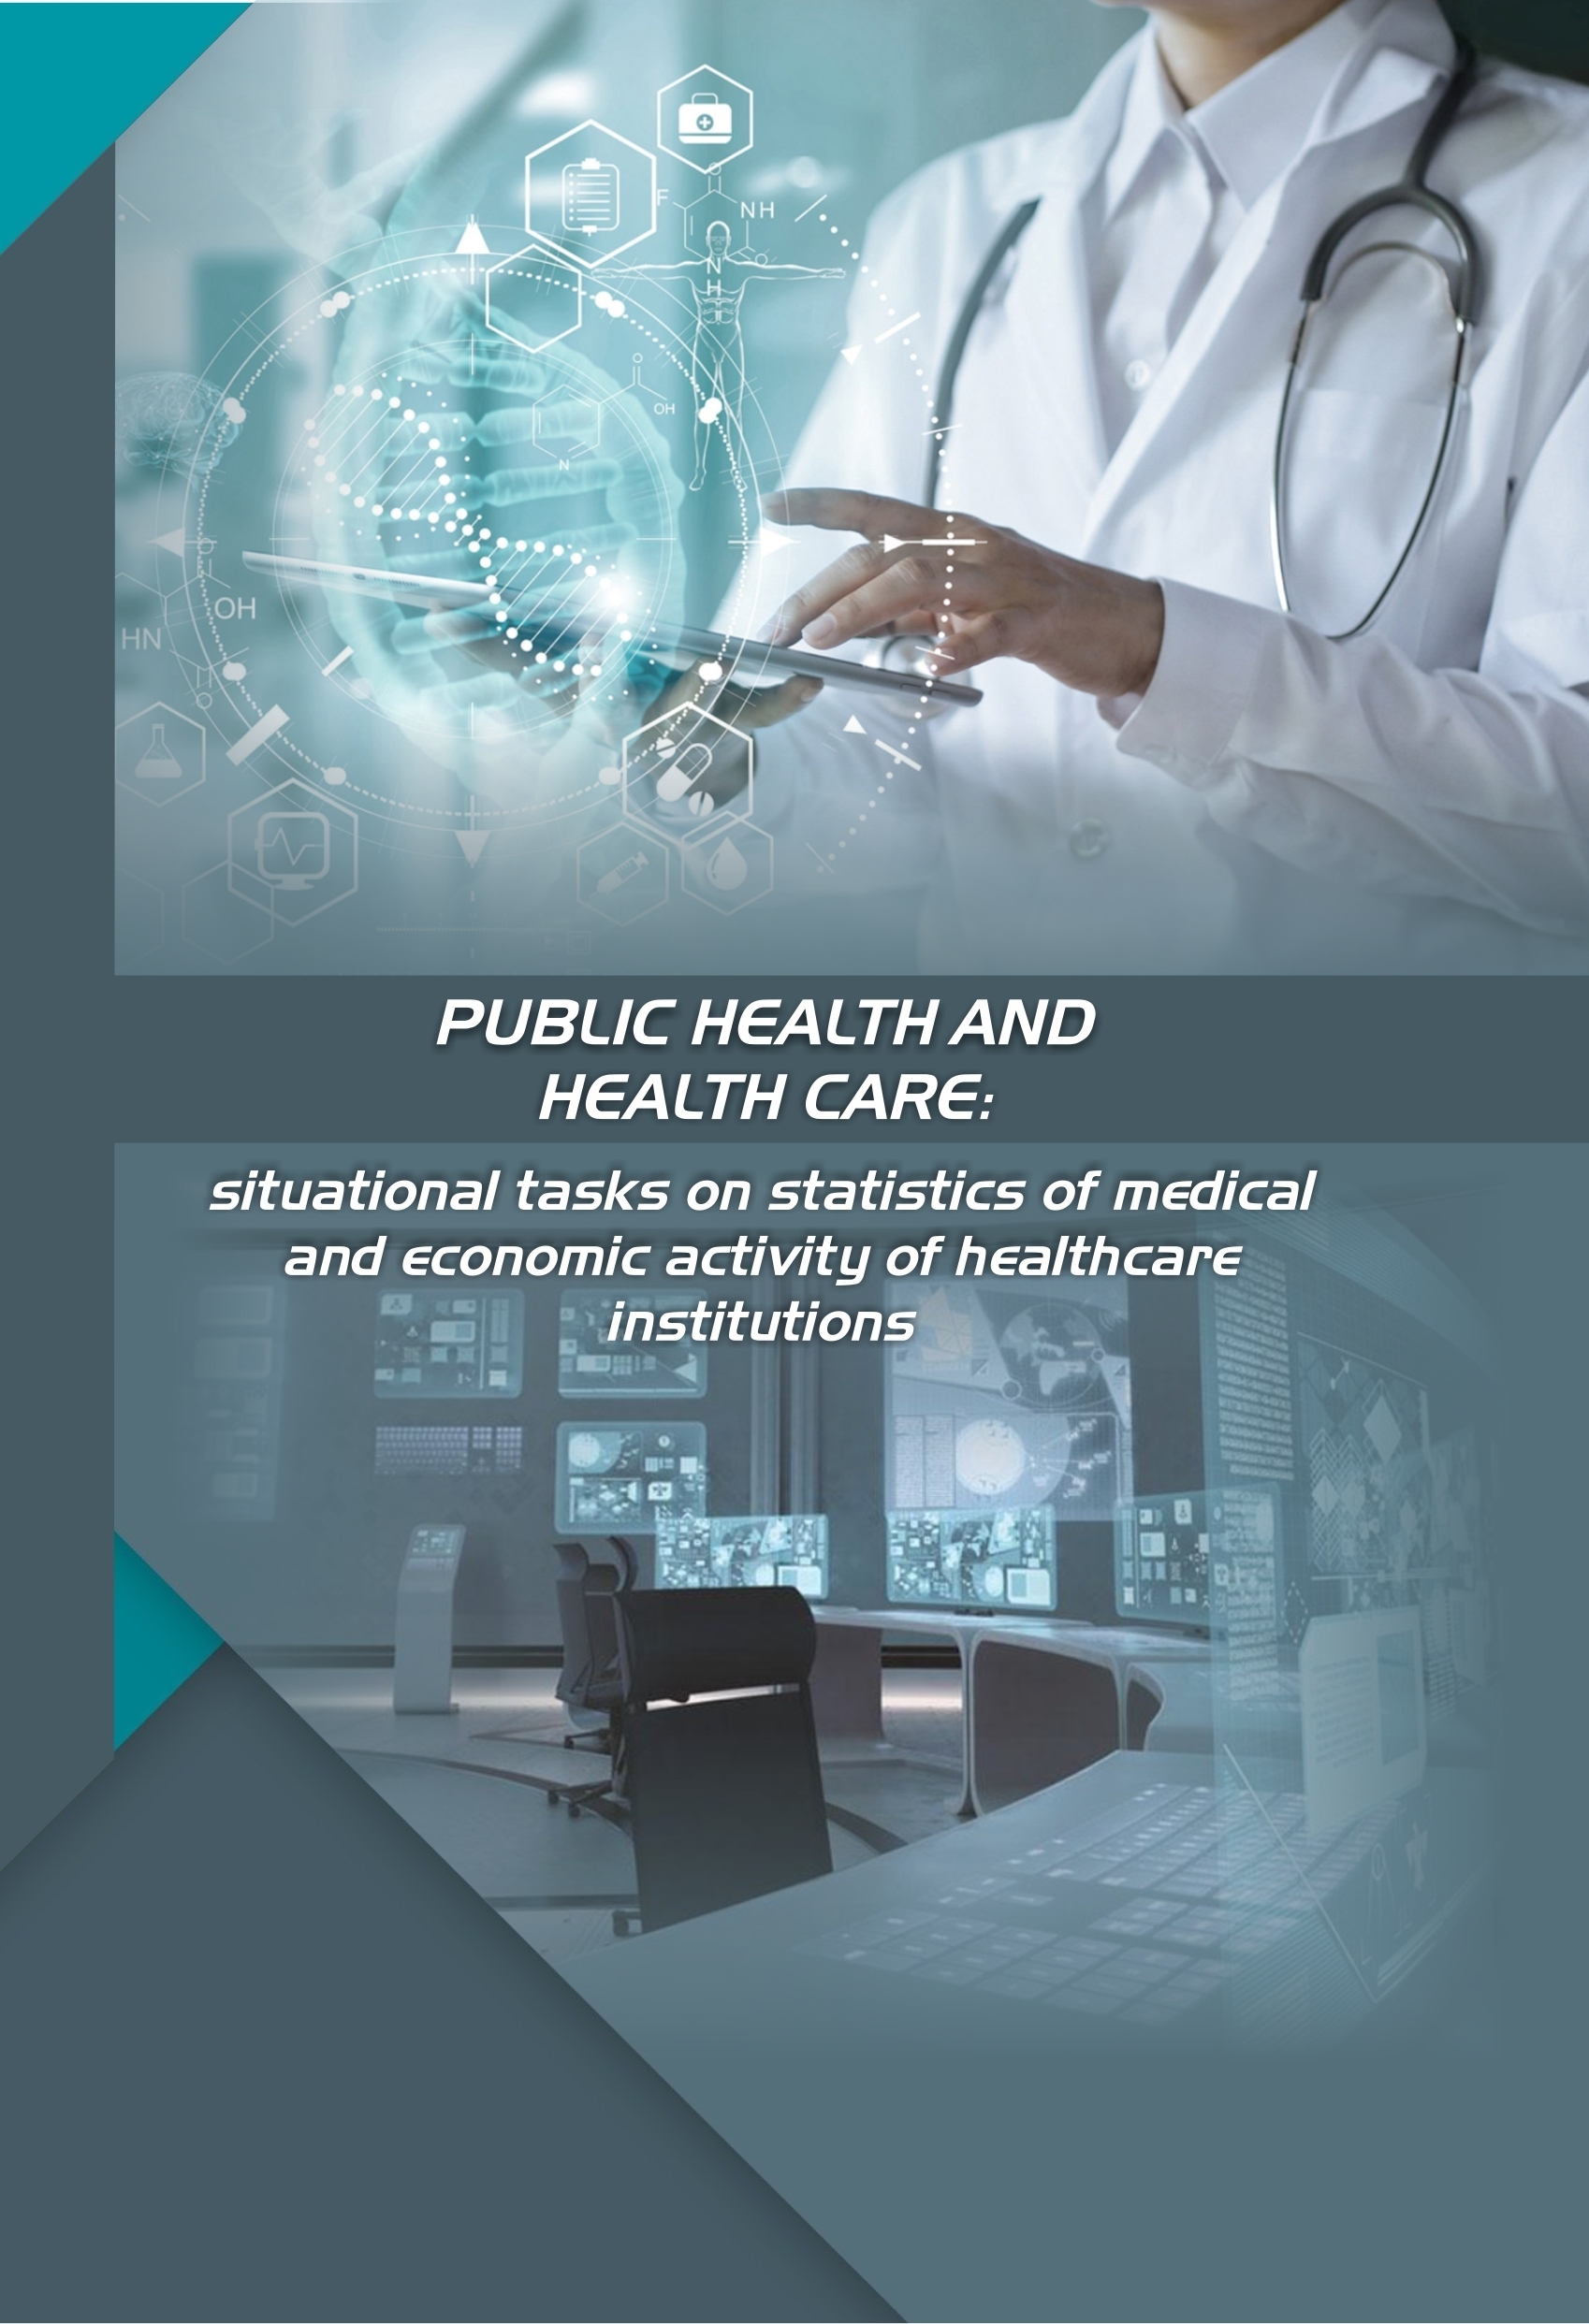 Public health and healthcare: situational tasks on statistics of medical and economic activity of healthcare institutions